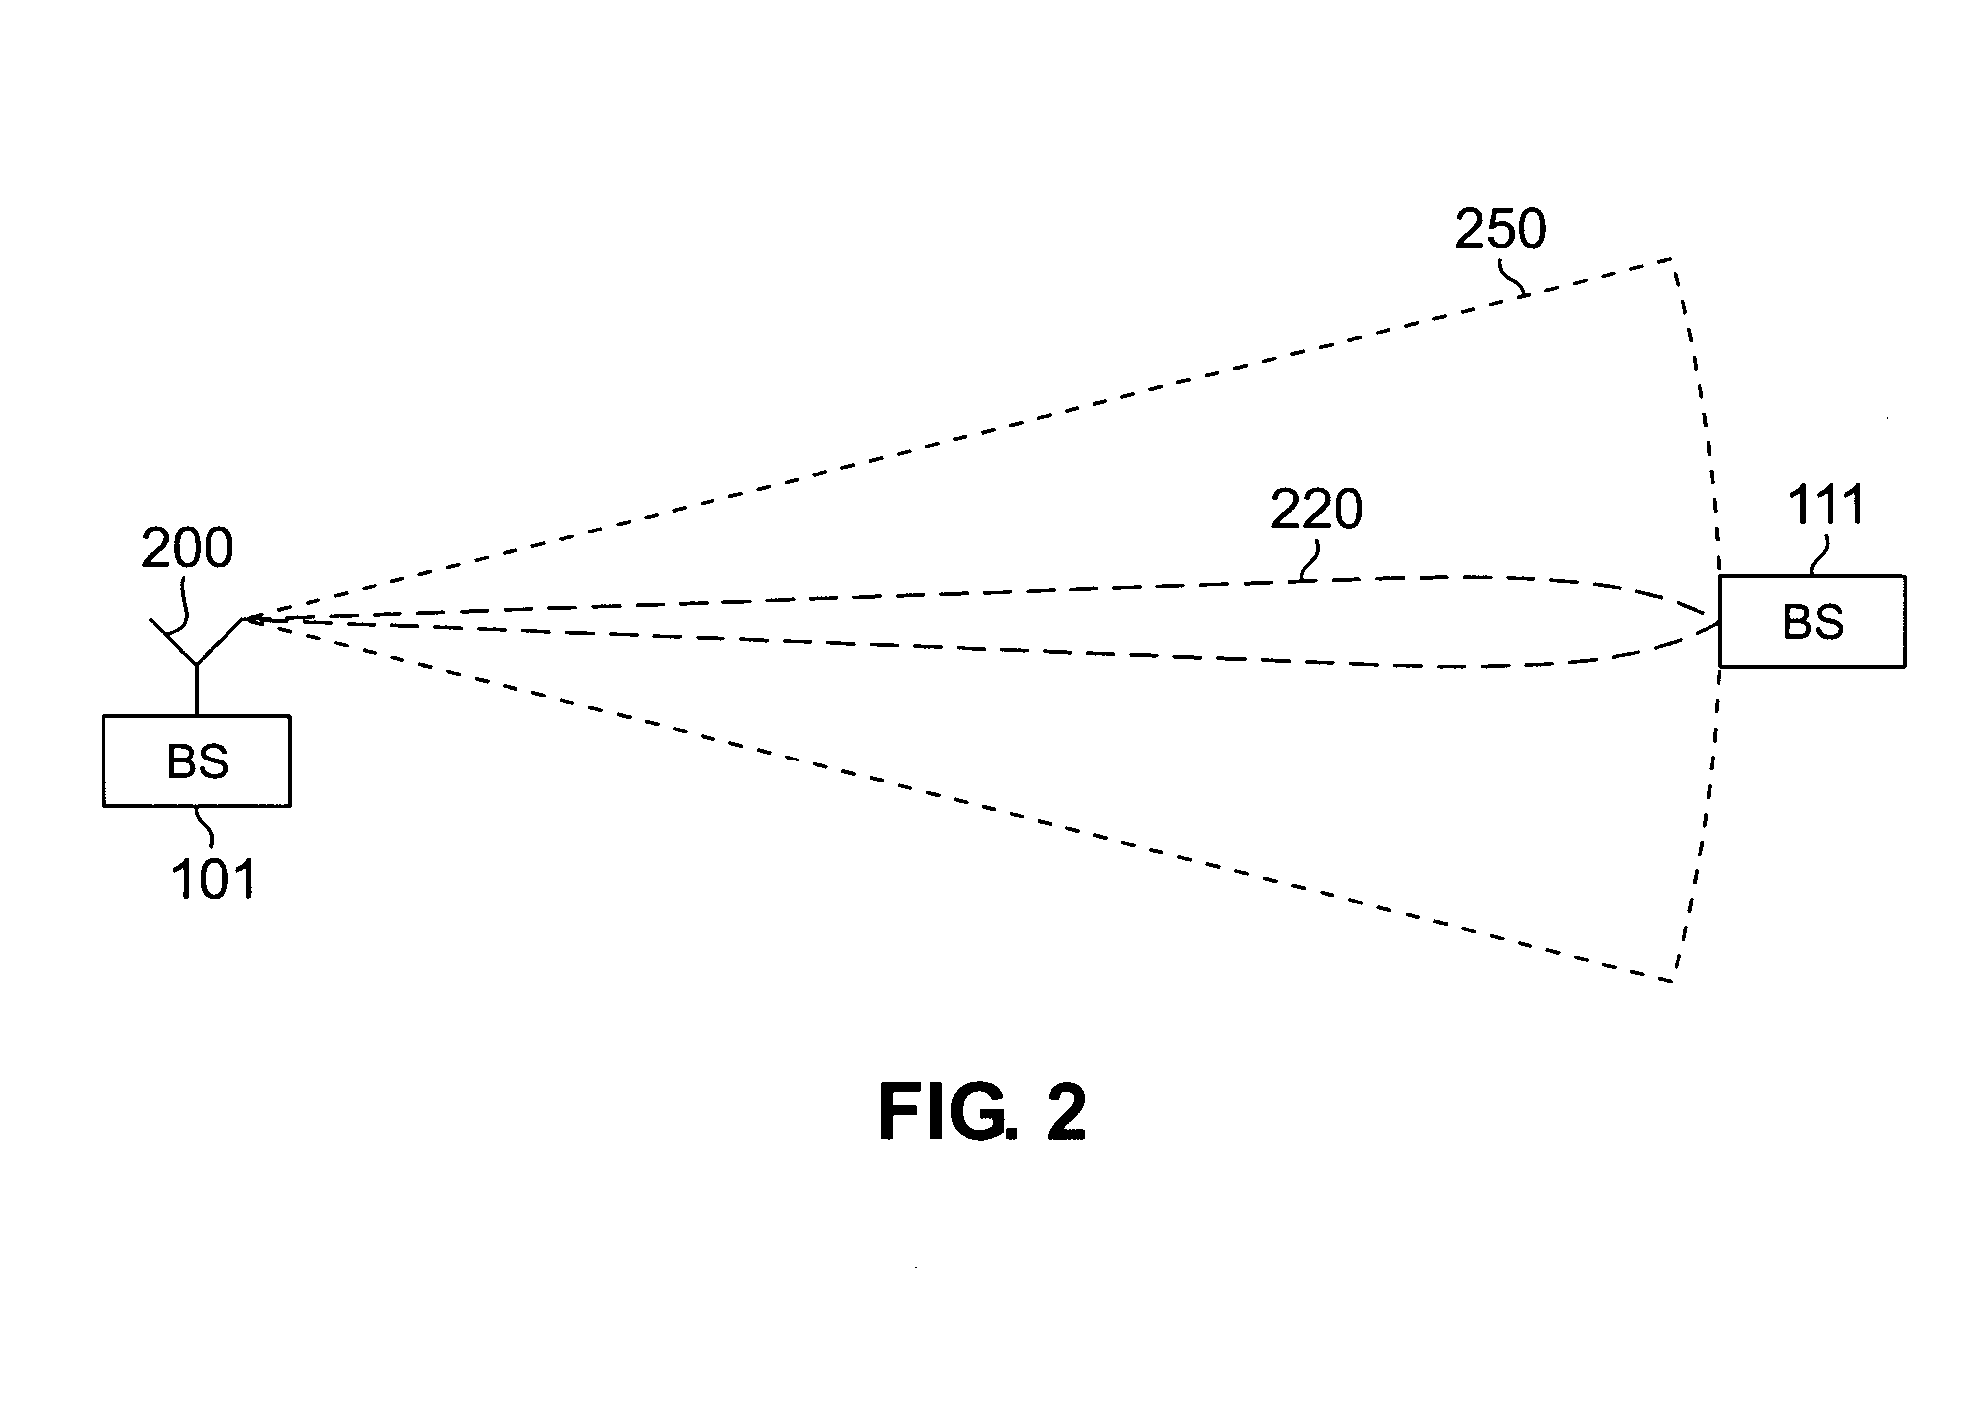 Apparatus and method for dynamic control of downlink beam width of an adaptive antenna array in a wireless network